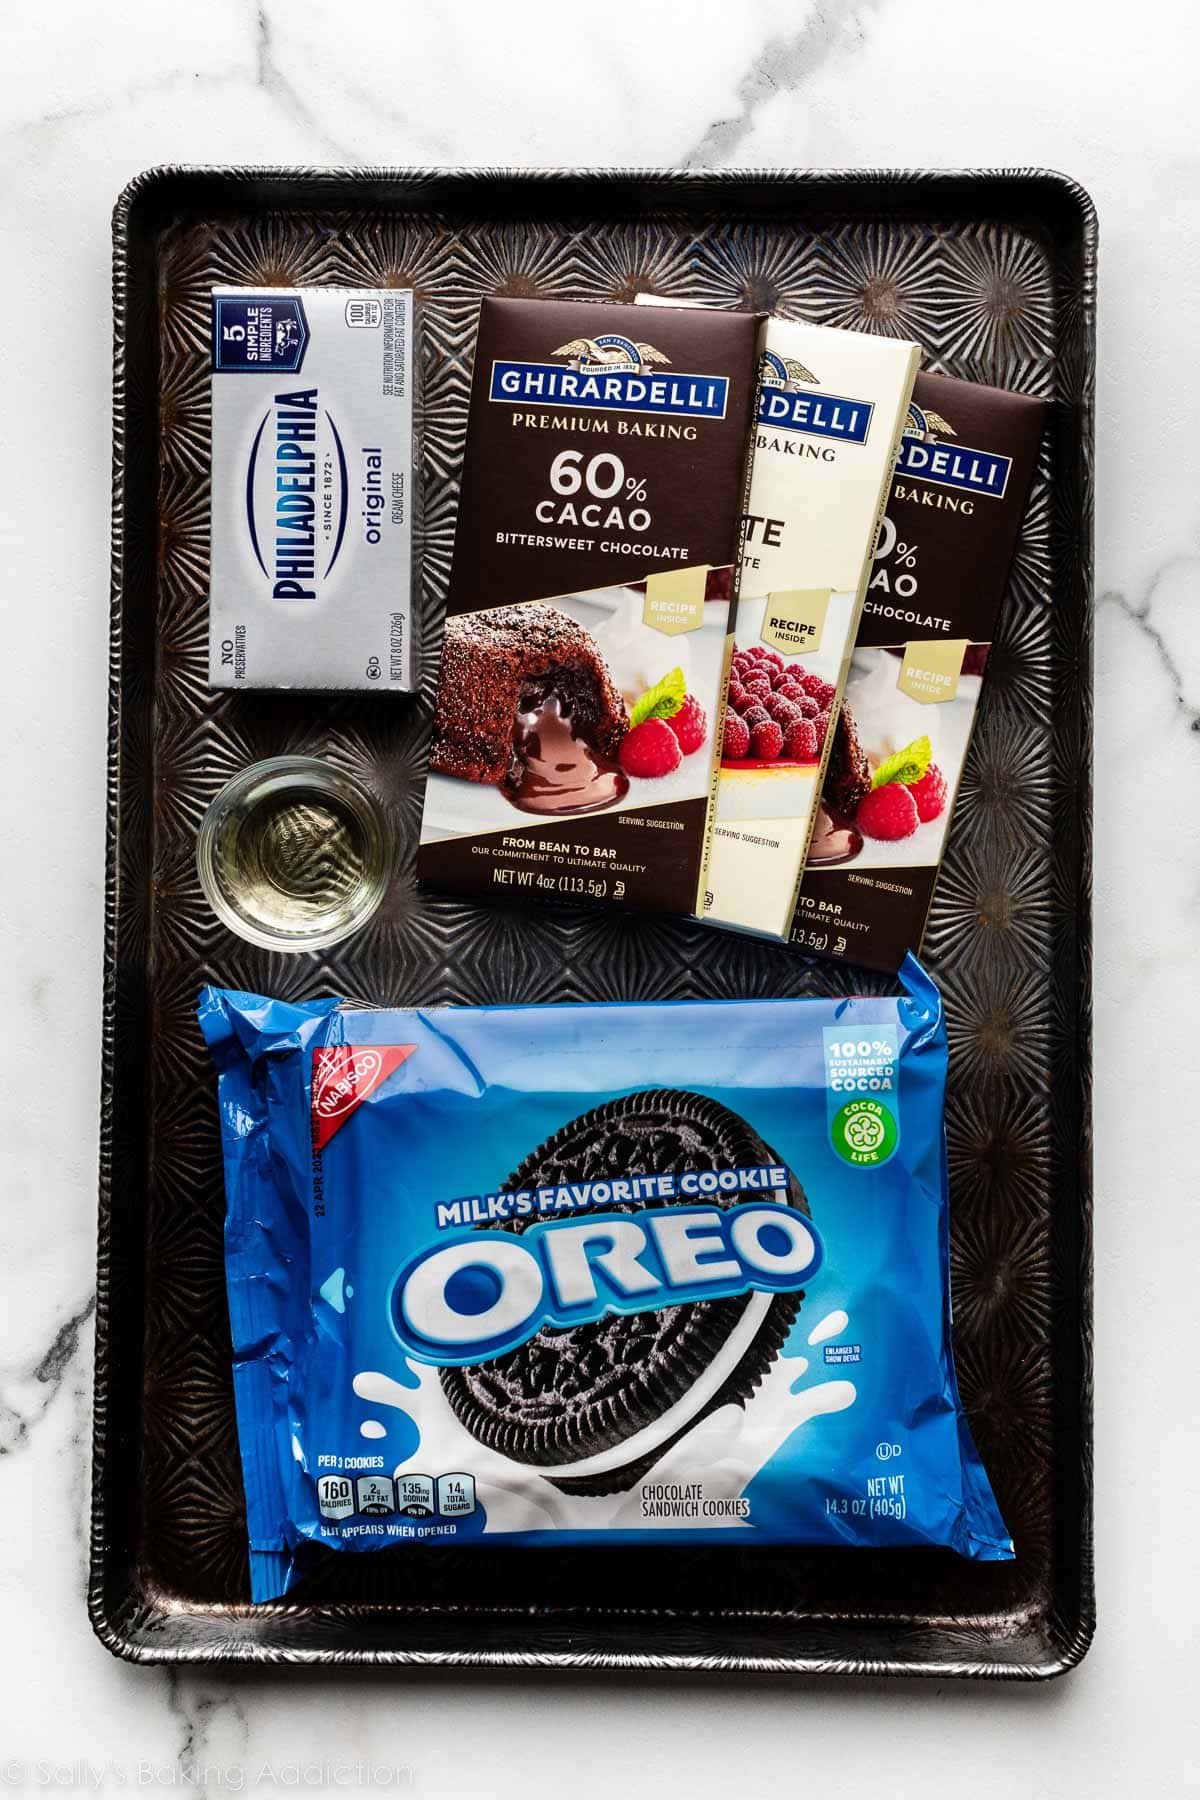 ingredients on baking sheet including chocolate, cream cheese, small bowl of oil, and Oreo cookie package.